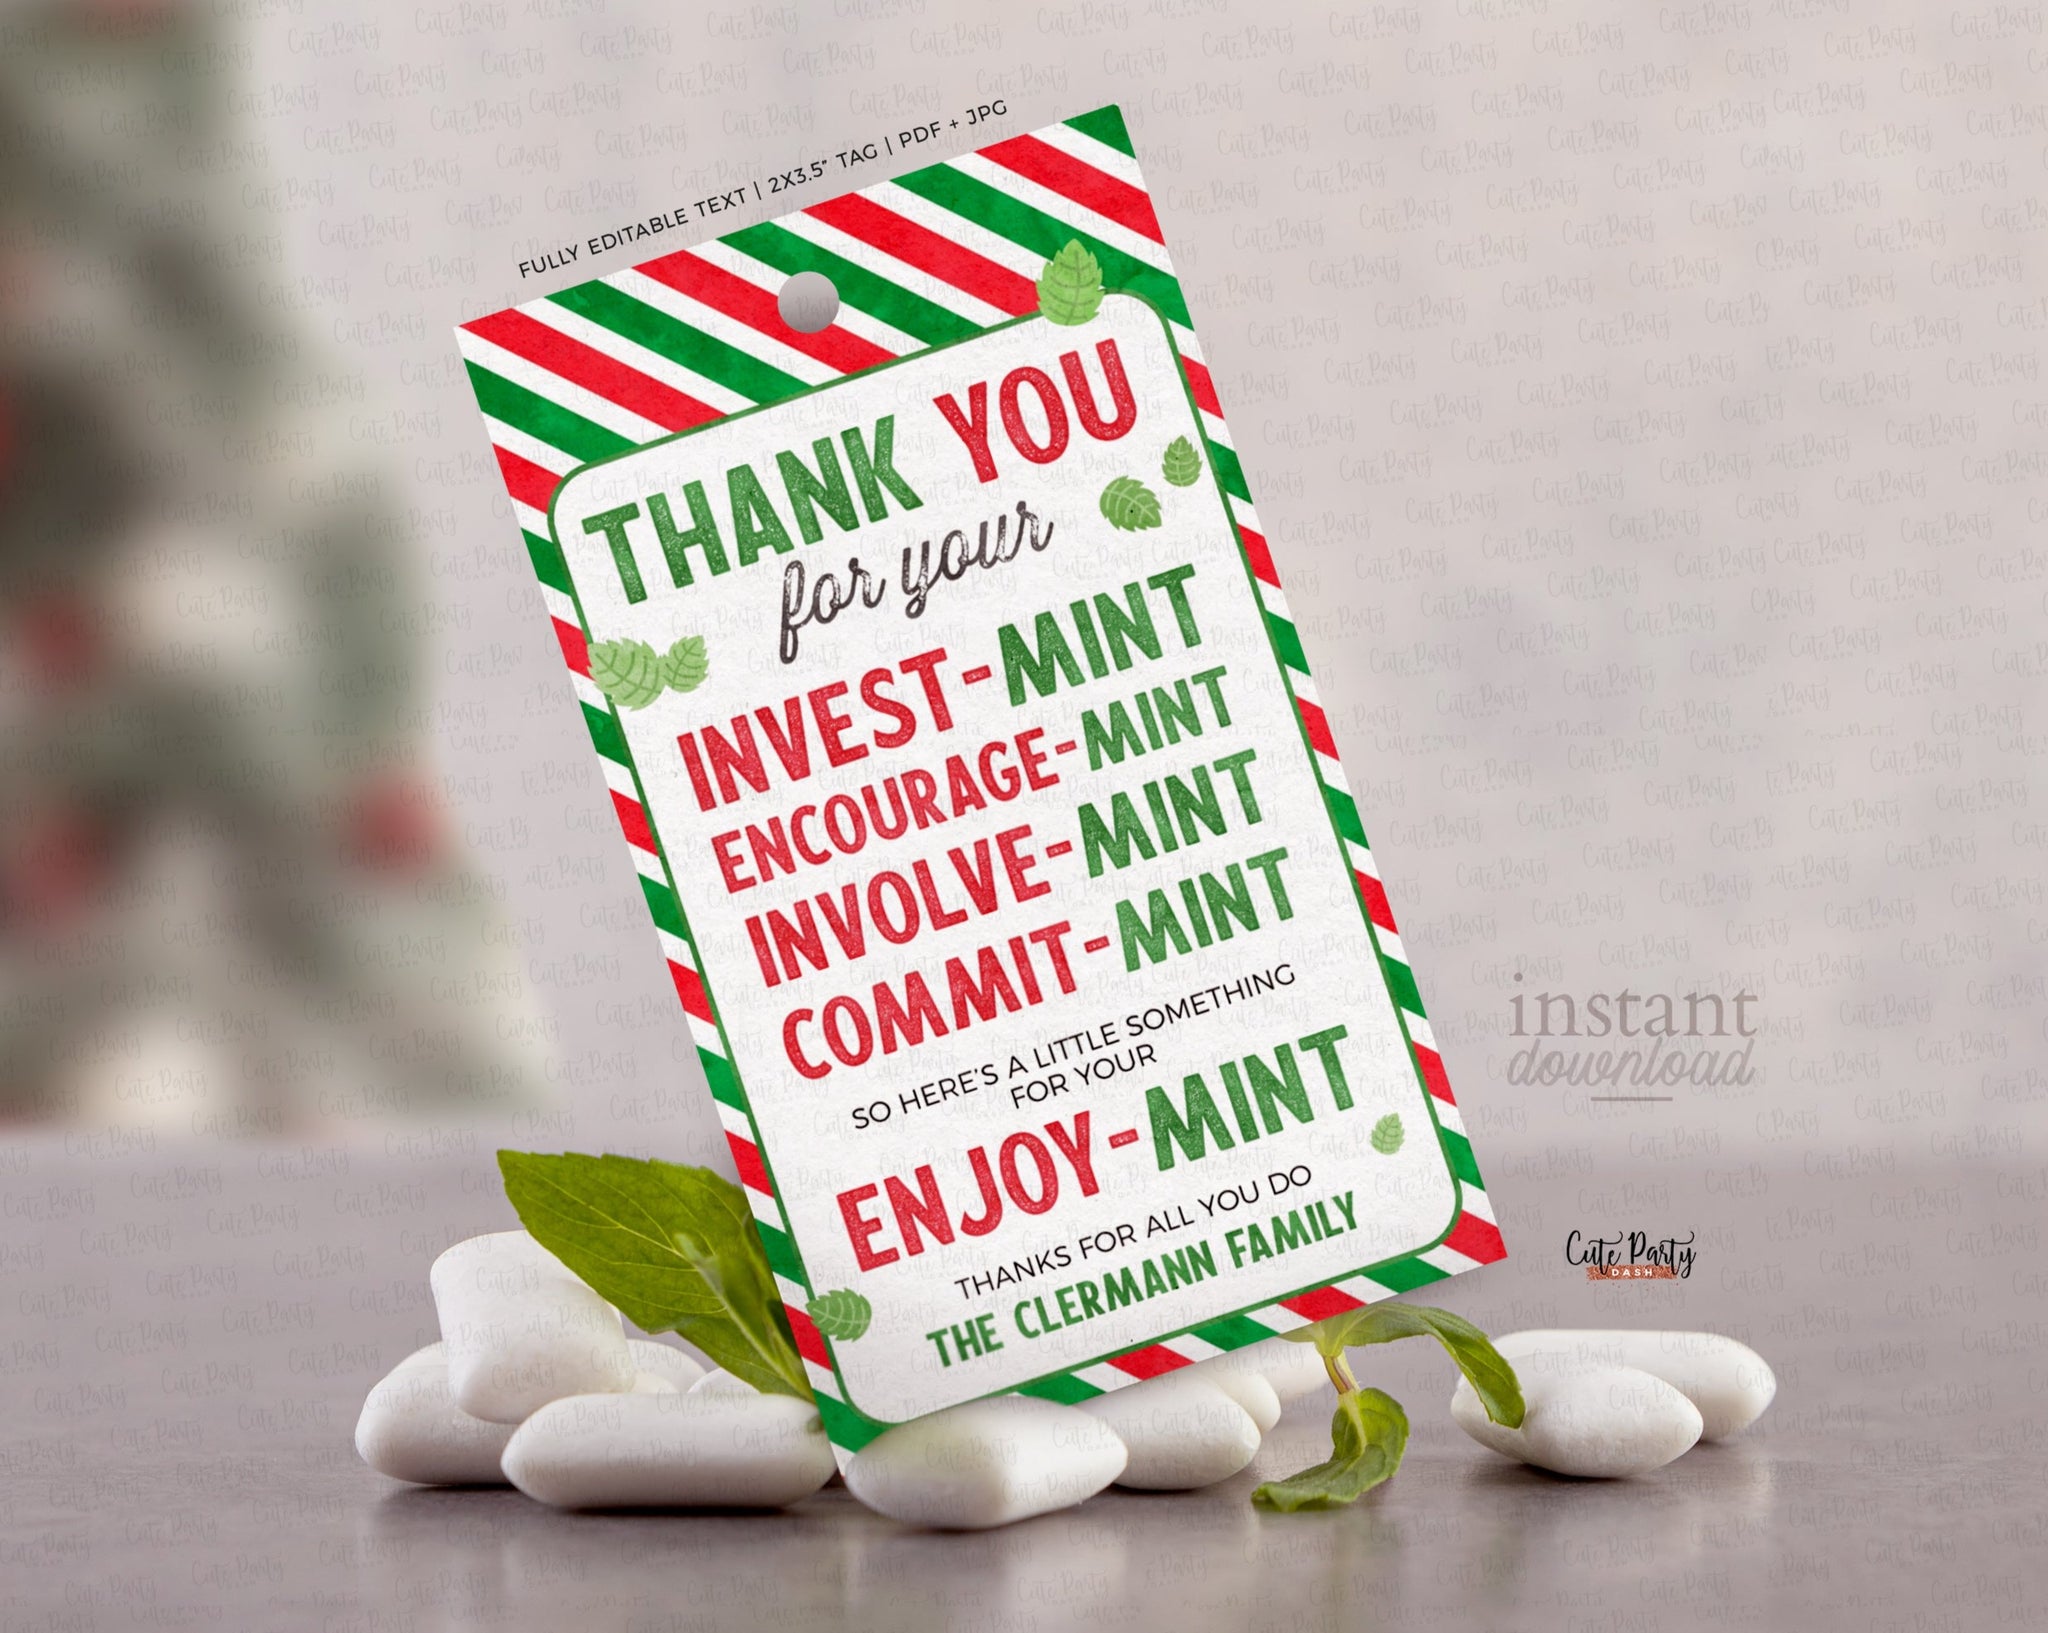 Christmas Thank You Mint Gift Tag, Enjoy-mint tag - Instant Download